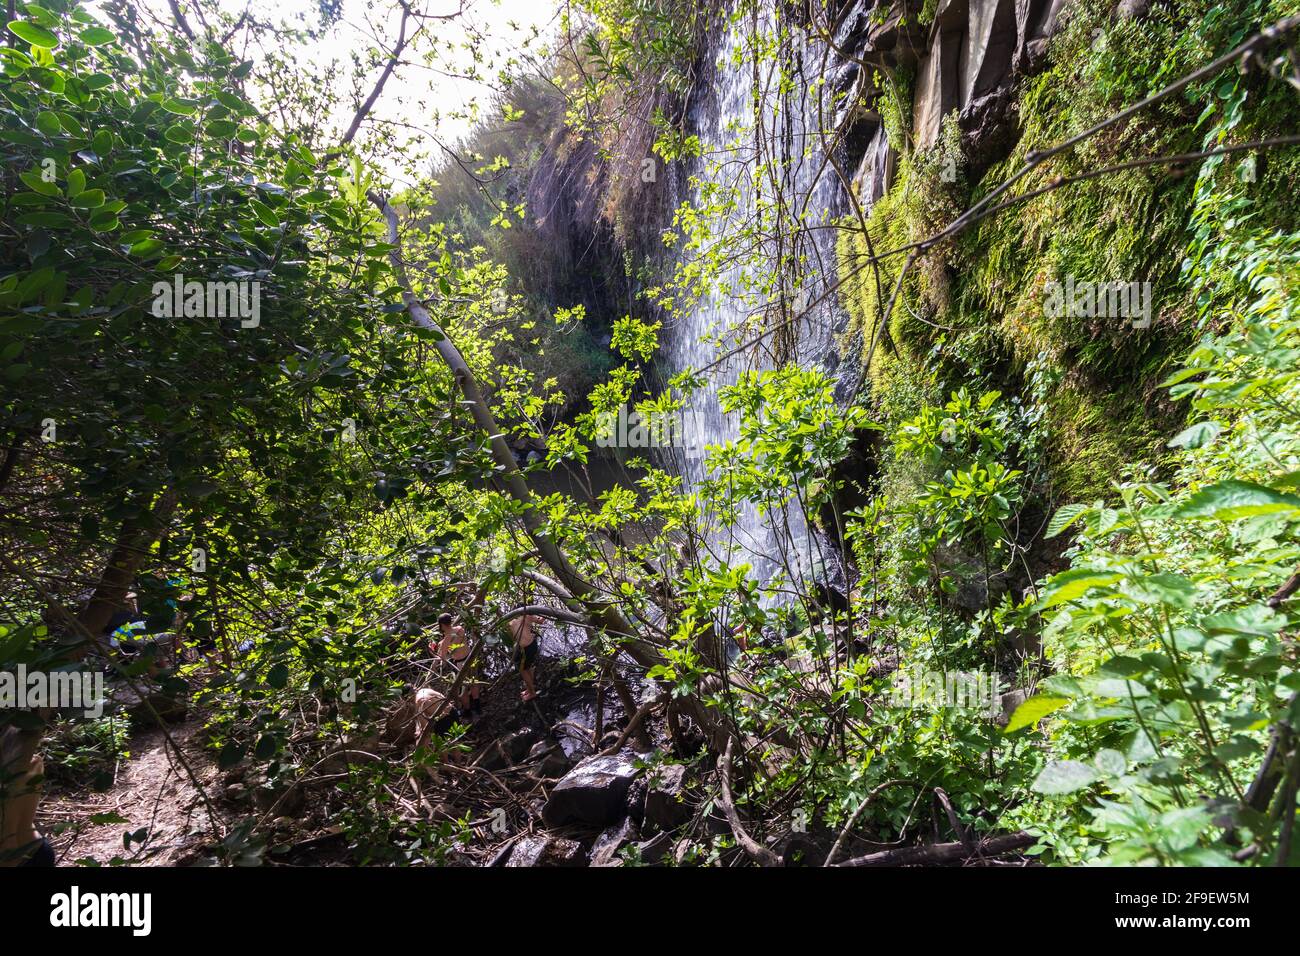 06-04-2021. aniem- israel. A high waterfall inside tall plants in Nahal Eit, in the artists' village of Aniam Stock Photo